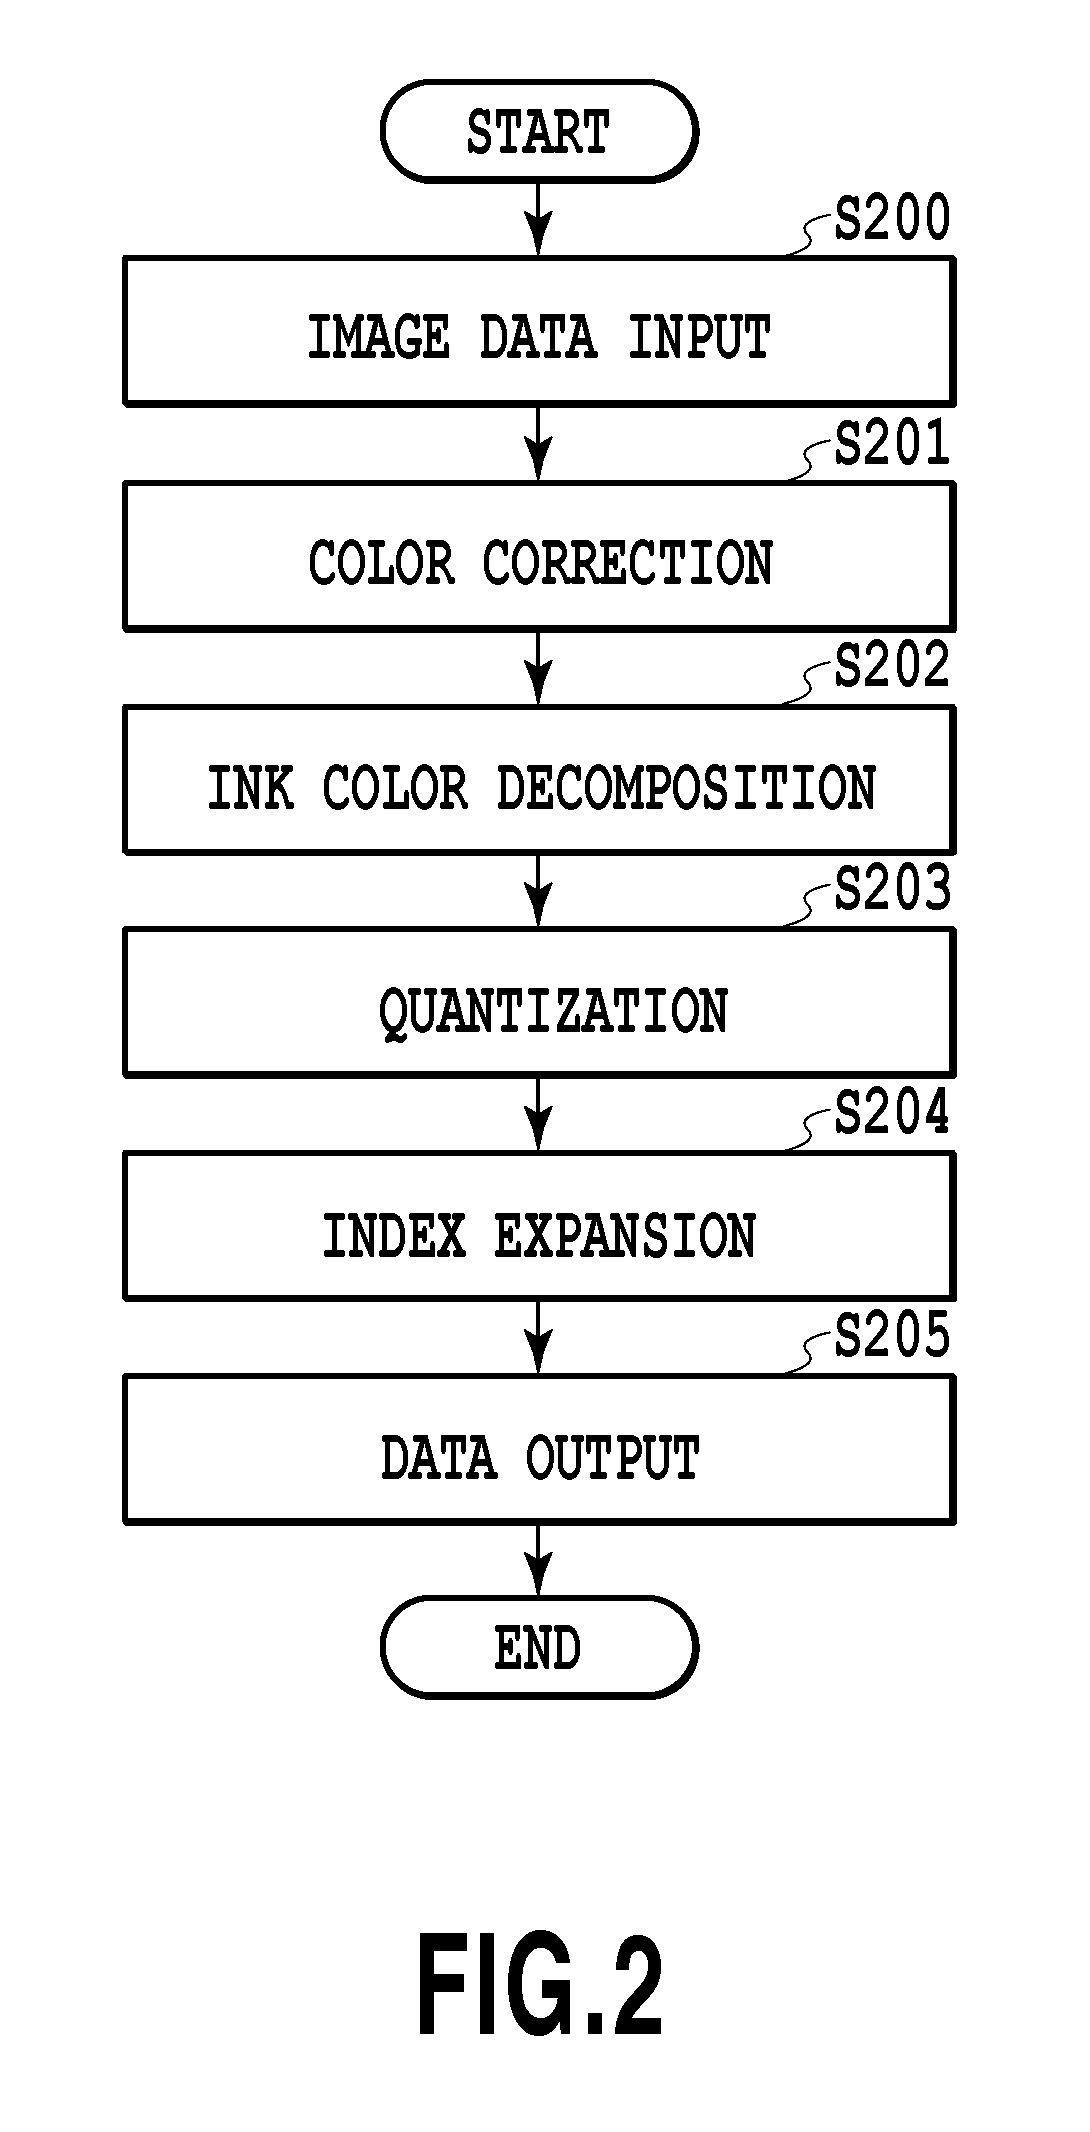 Image processing apparatus and image processing method generating quantized data based on a determined print operation